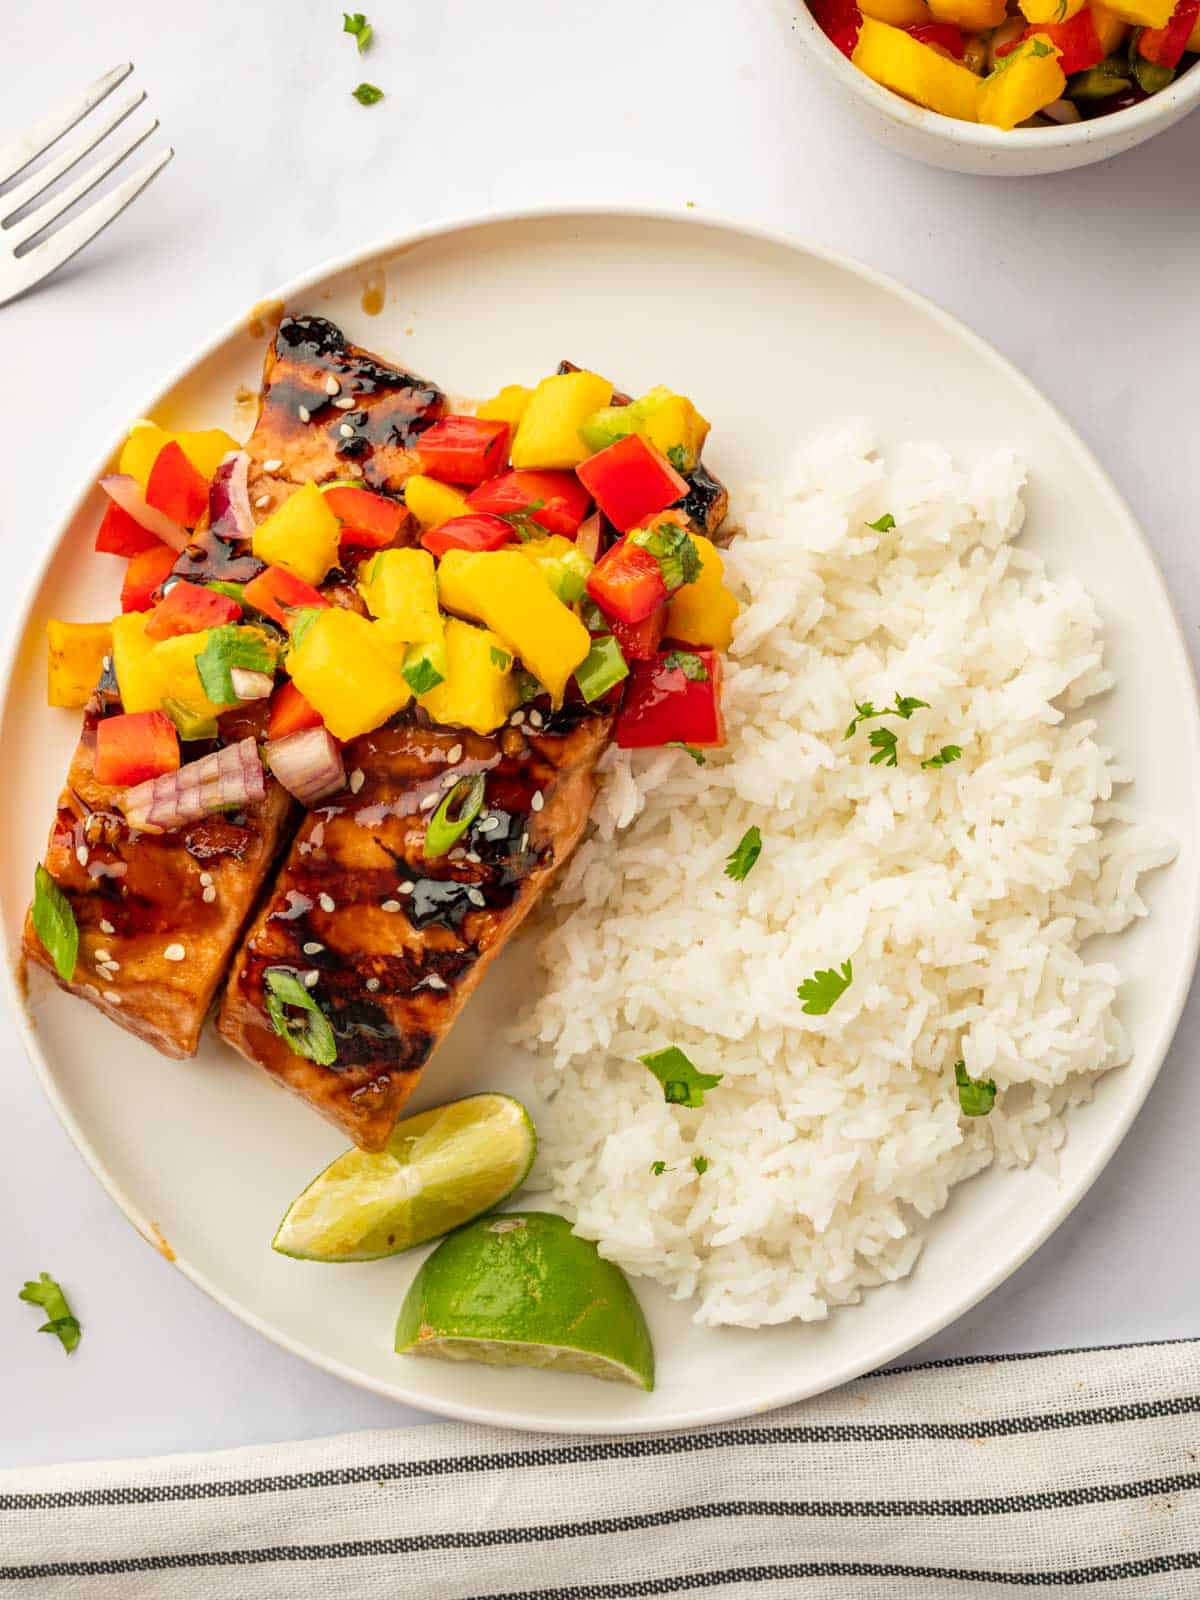 Serve marinated grilled salmon recipe on a plate with rice.